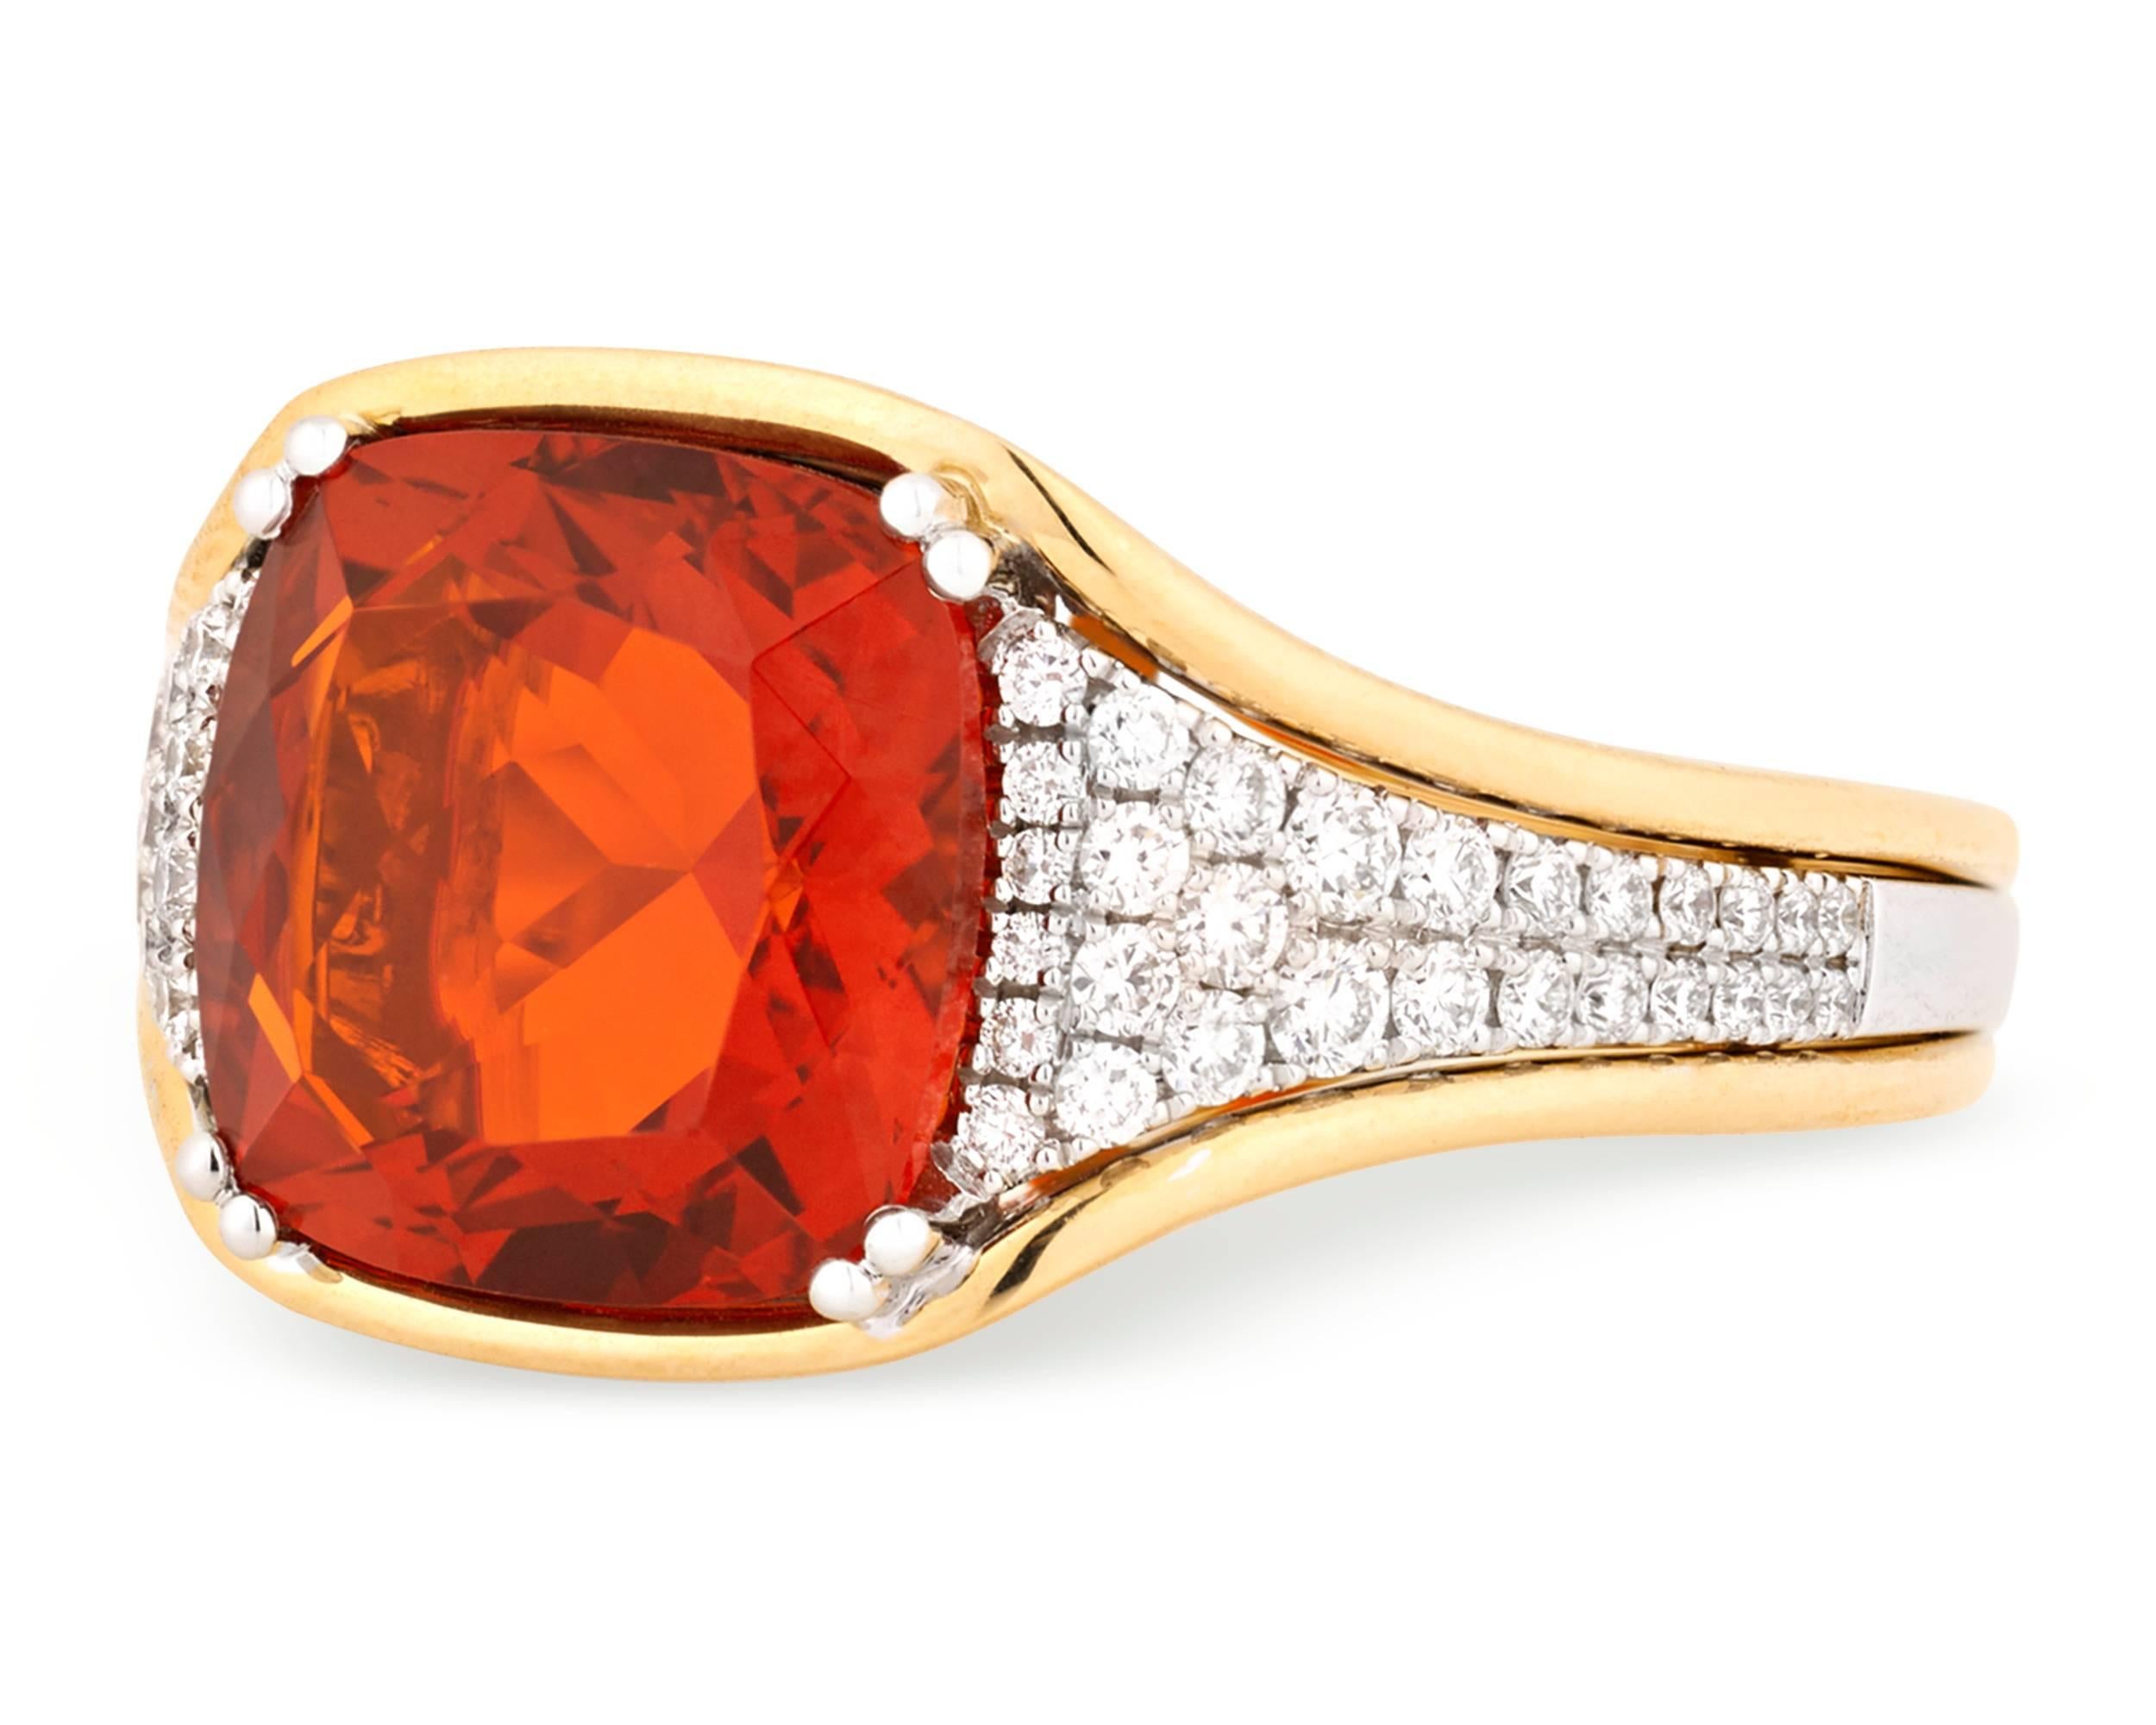 The heat of a magnificent fire opal is perfectly balanced by icy white diamonds totaling 0.40 carat in this eye-catching ring. Weighing 3.40 carats, the rare gemstone displays the signature tangerine orange hue for which this unique stone is known.